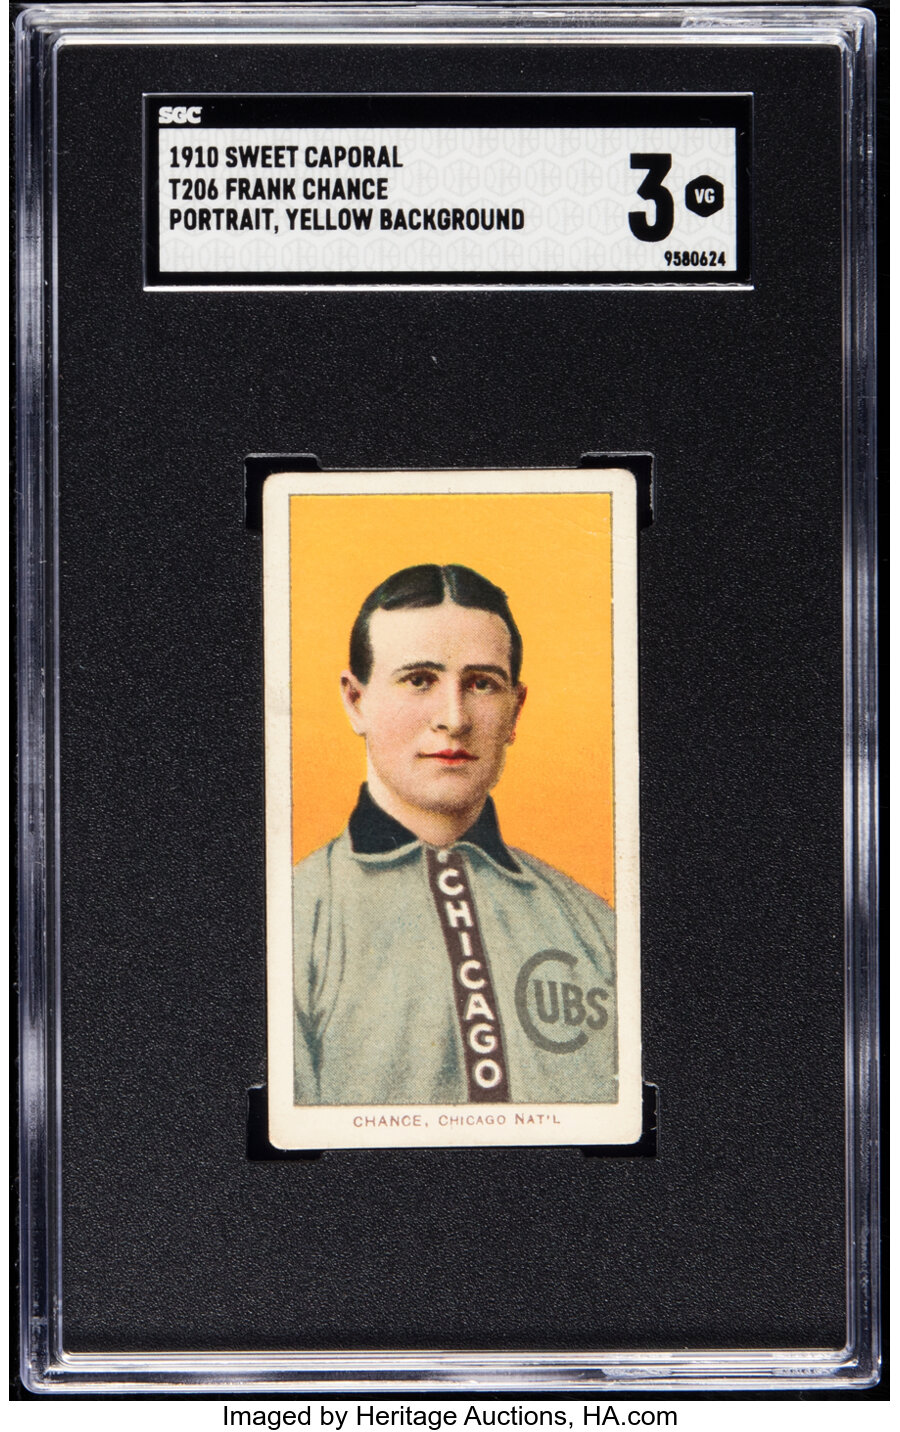 1909-11 T206 Sweet Caporal Frank Chance (Portrait, Yellow Background) SGC VG 3